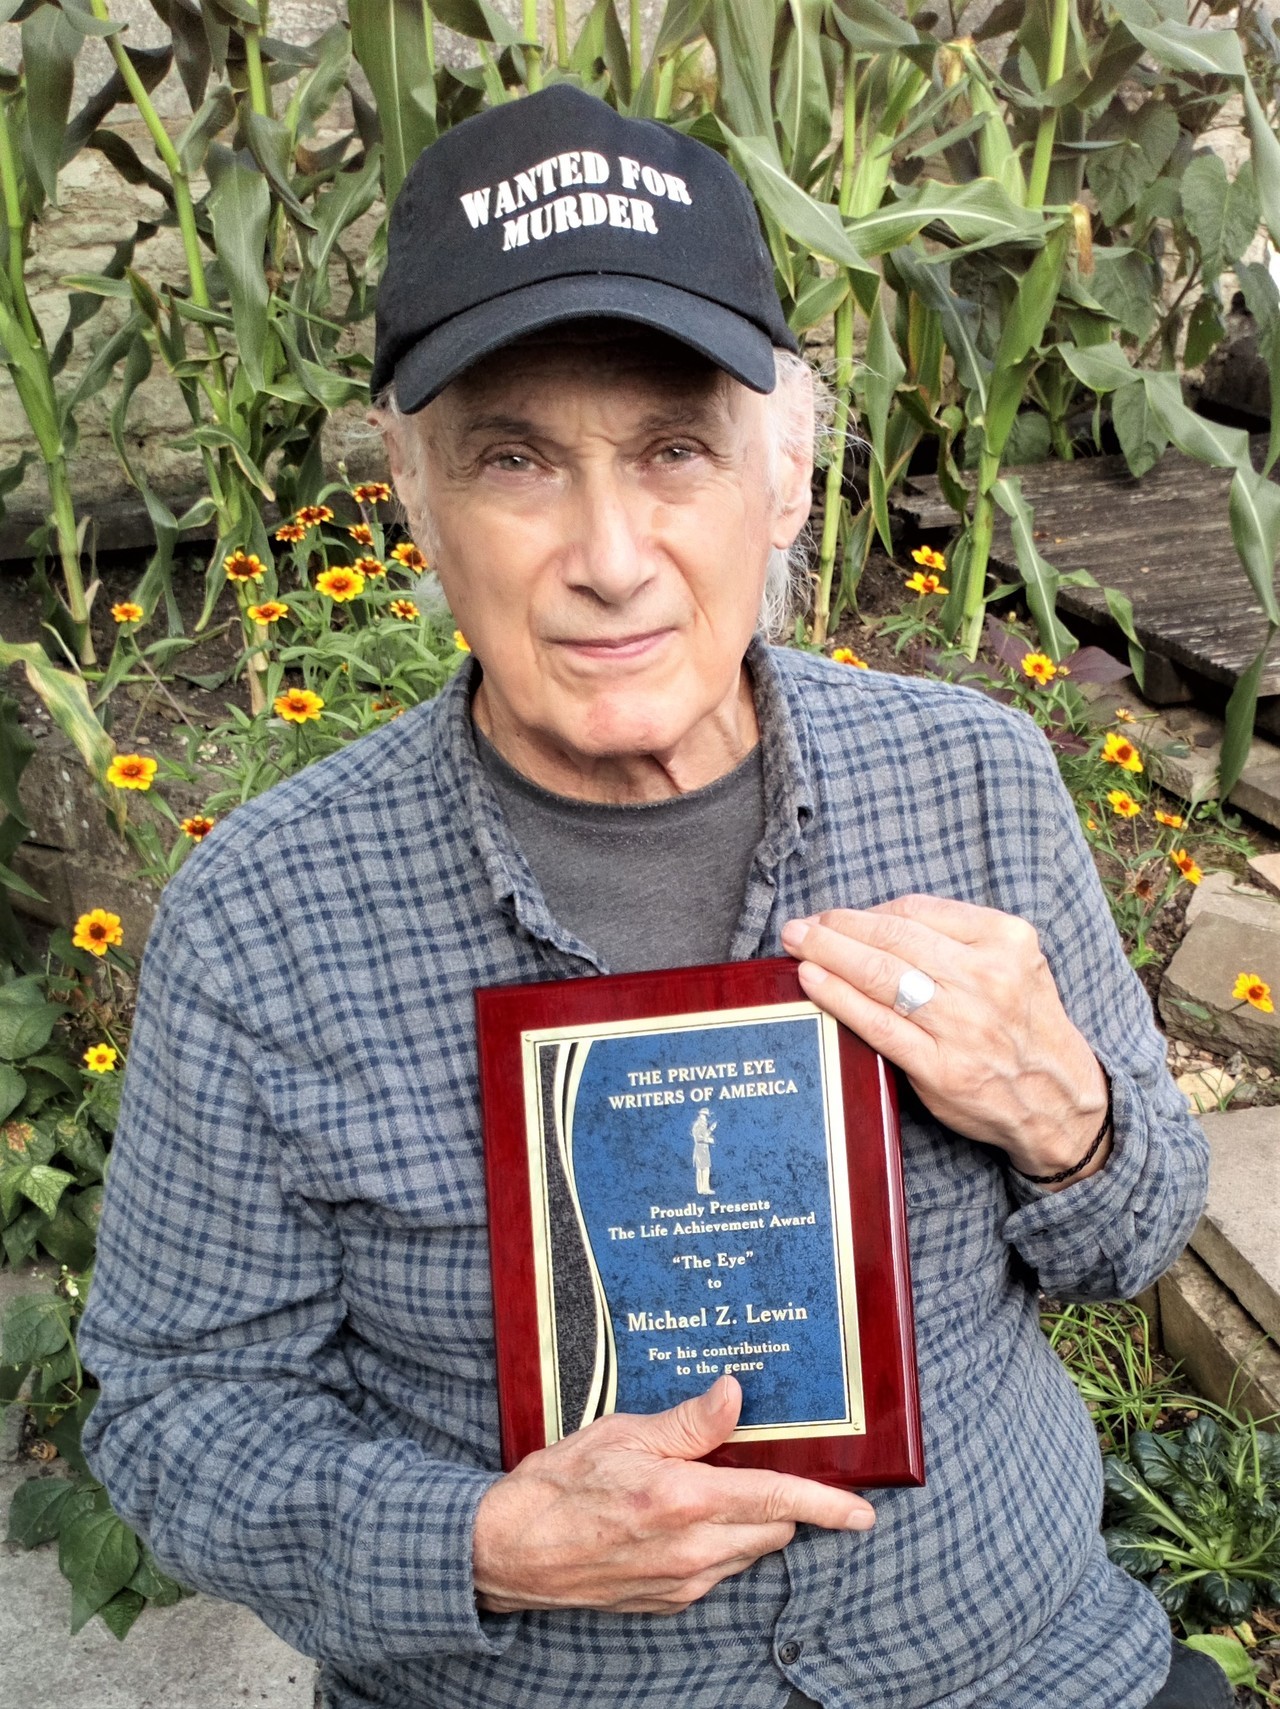 I'm delighted to have received the 2021 lifetime achievement award - The Eye - from The Private Eye Writers of America.  Acknowledgement by one's peers is very special.  Thank you PWA.  Photo by Elsie.